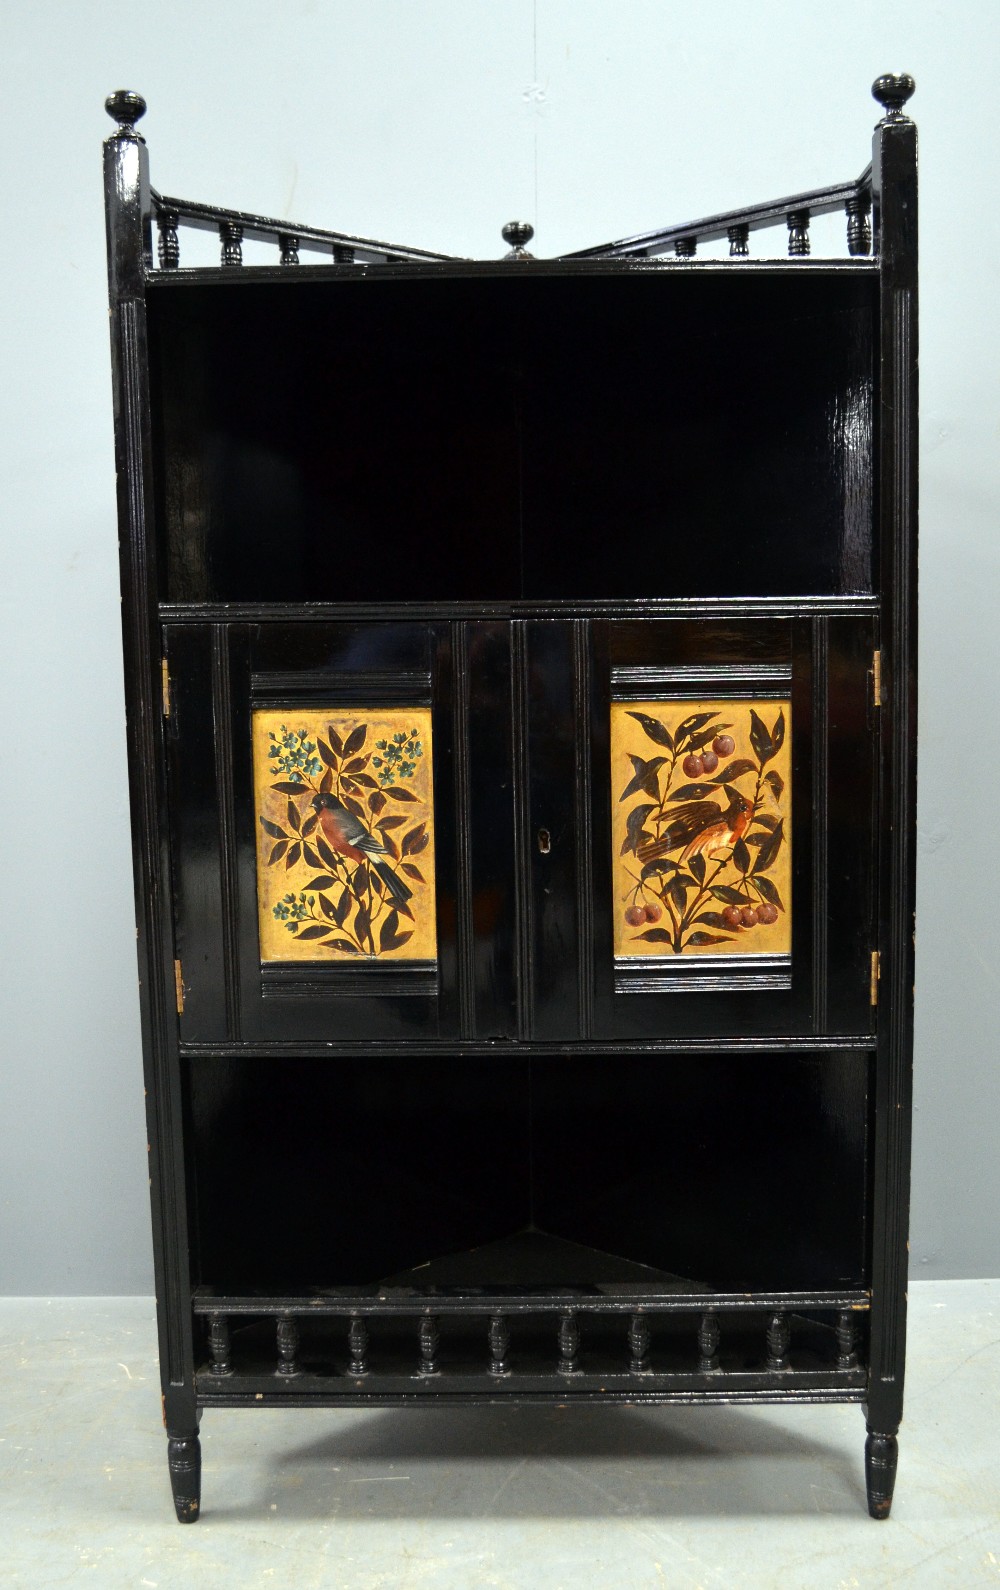 Ebonised corner cupboard in the manner of E. W. Godwin with gilt decorated panels depicting birds